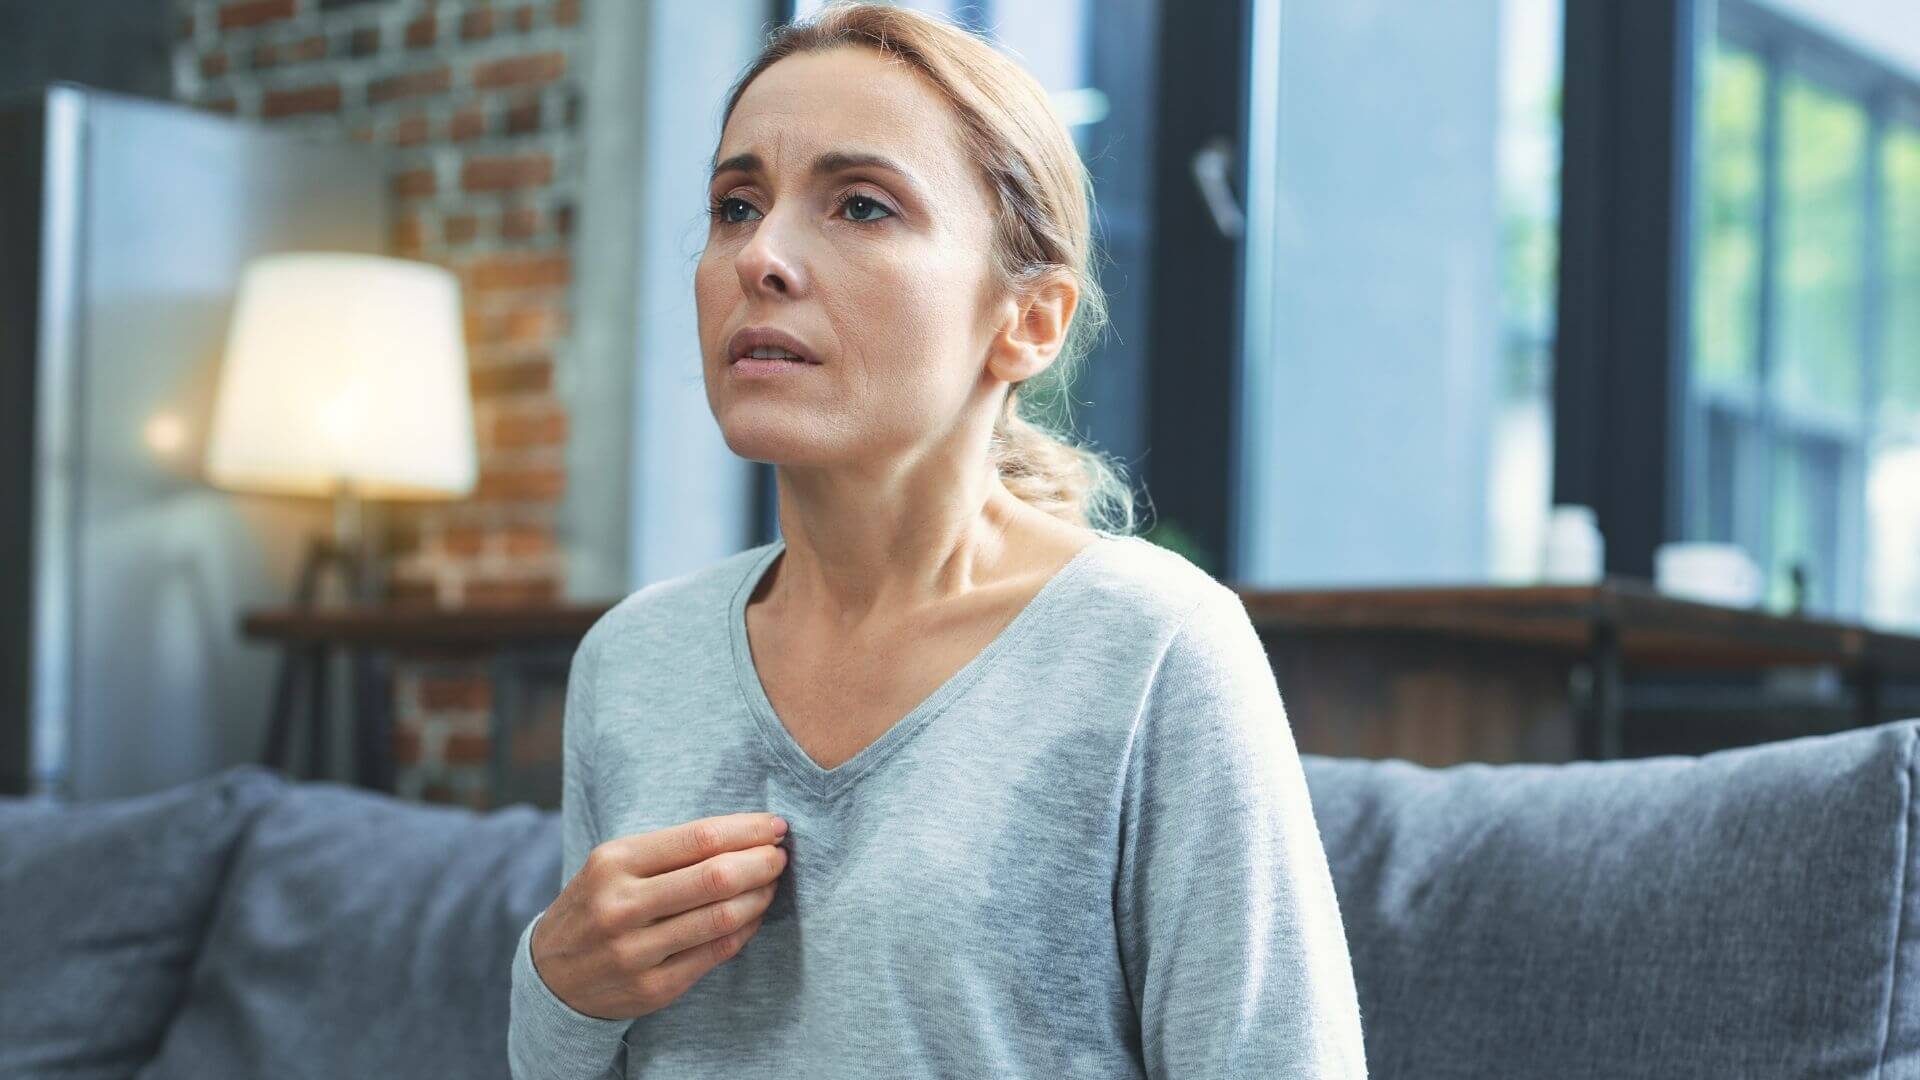 Difficulty Swallowing: Tips to Relieve Anxiety Symptoms